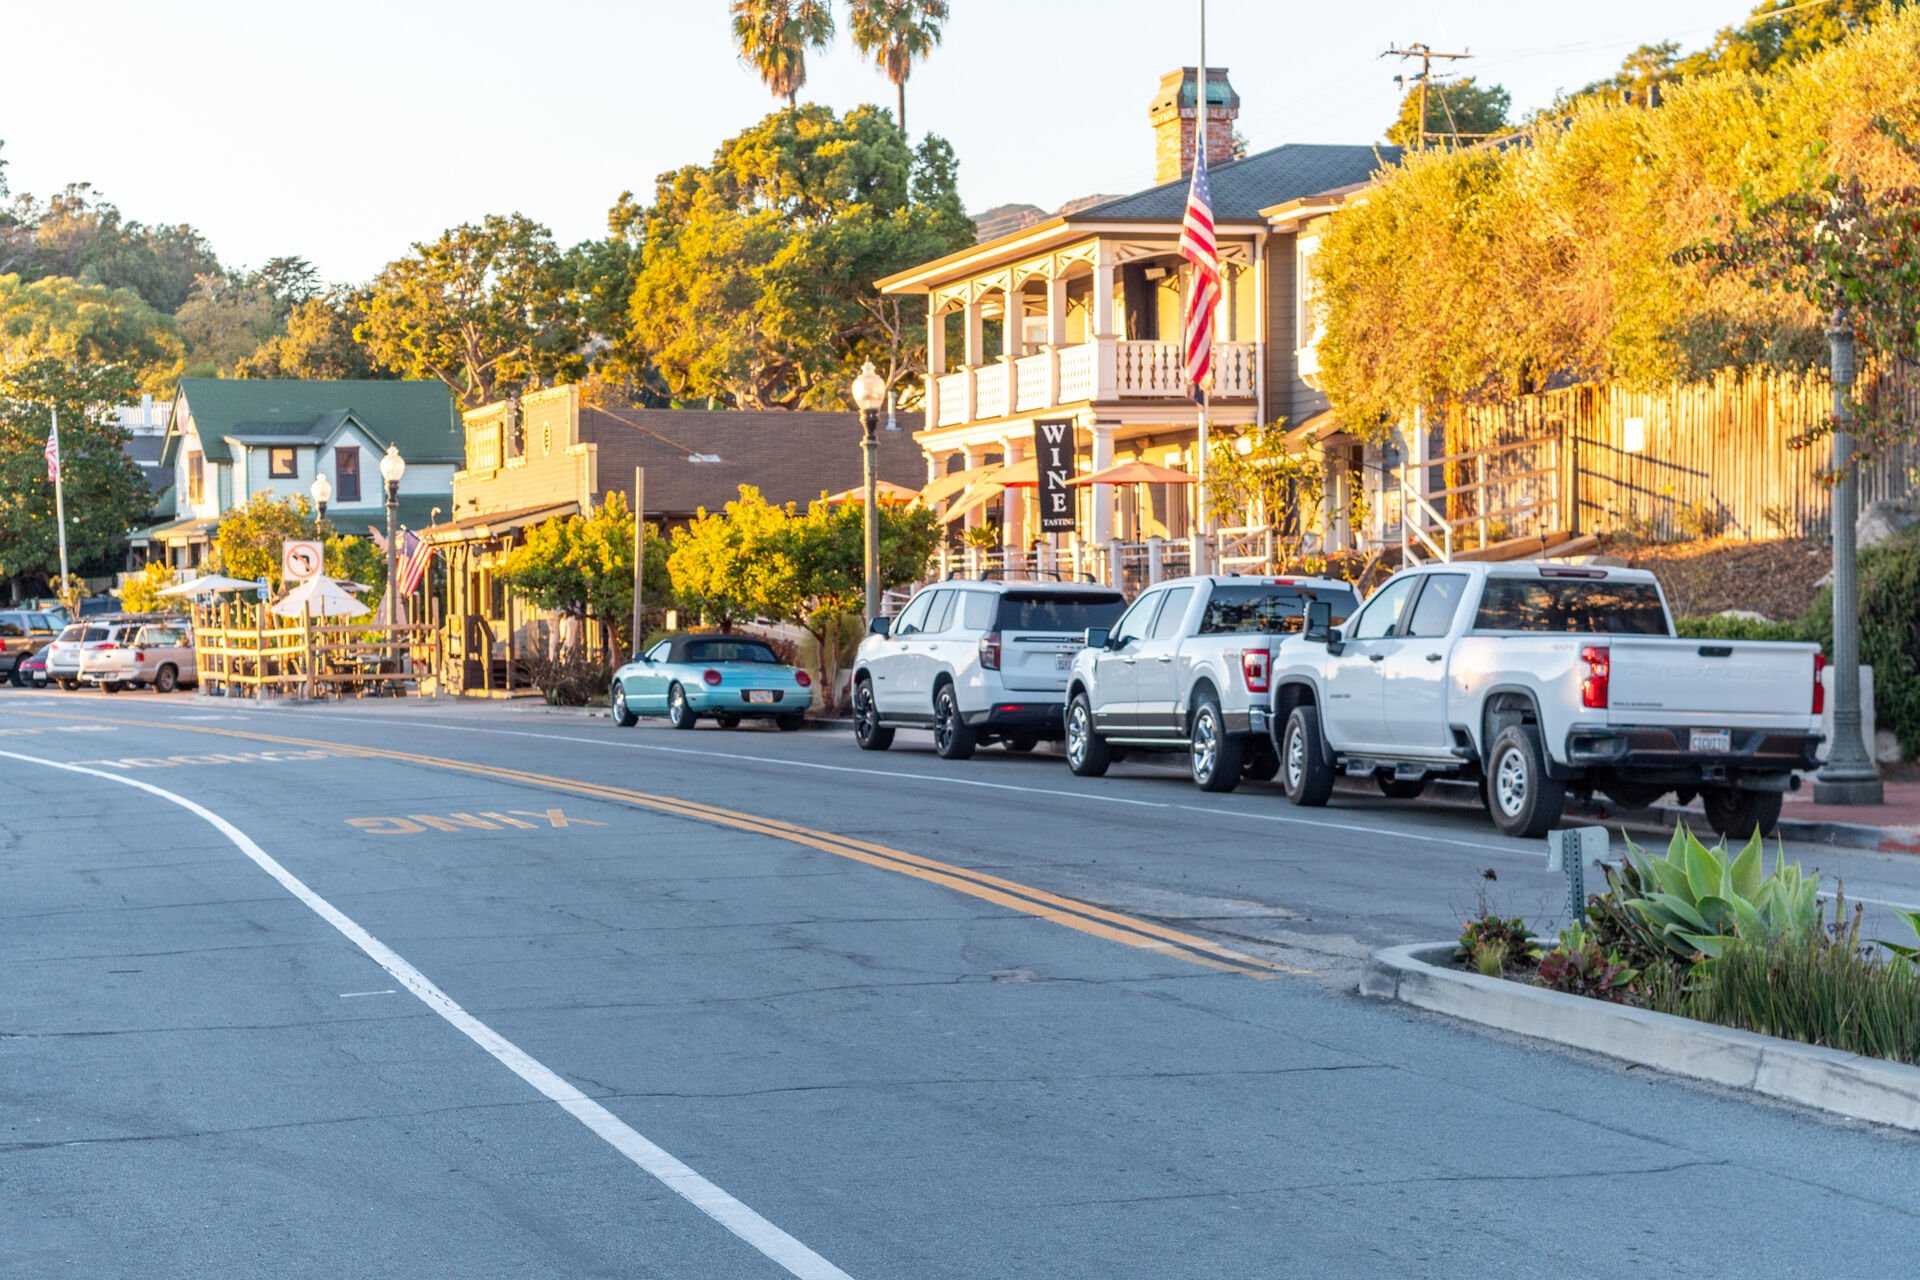 Views of the historic downtown Summerland streets and shops